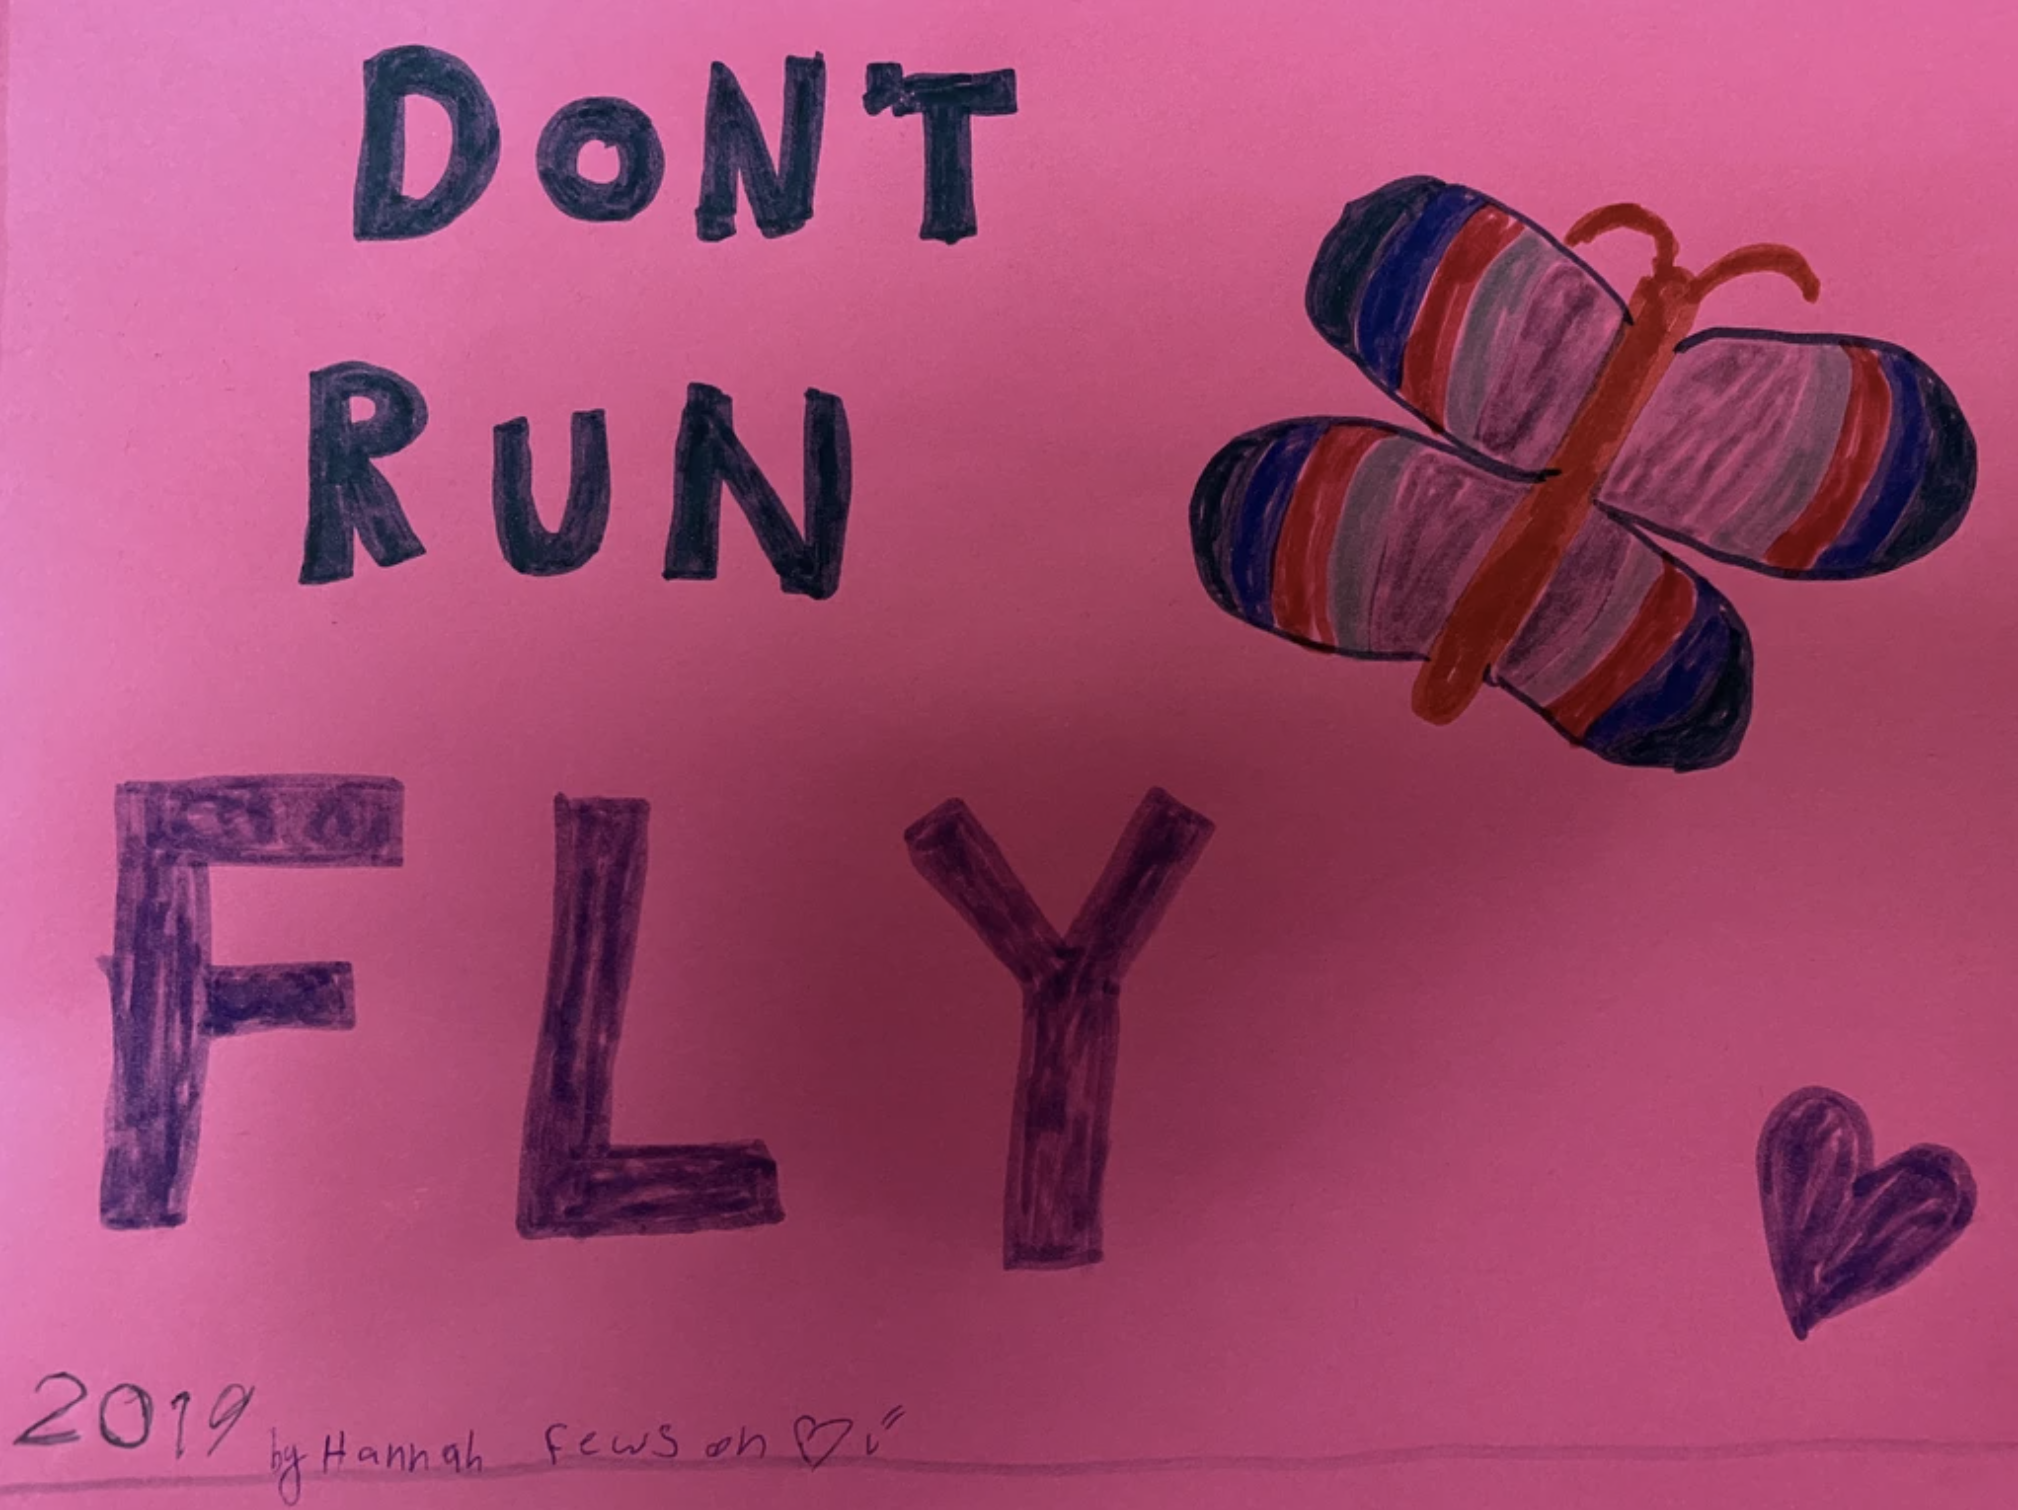 Don't run fly with a drawn butterfly and heart by Hannah Fews